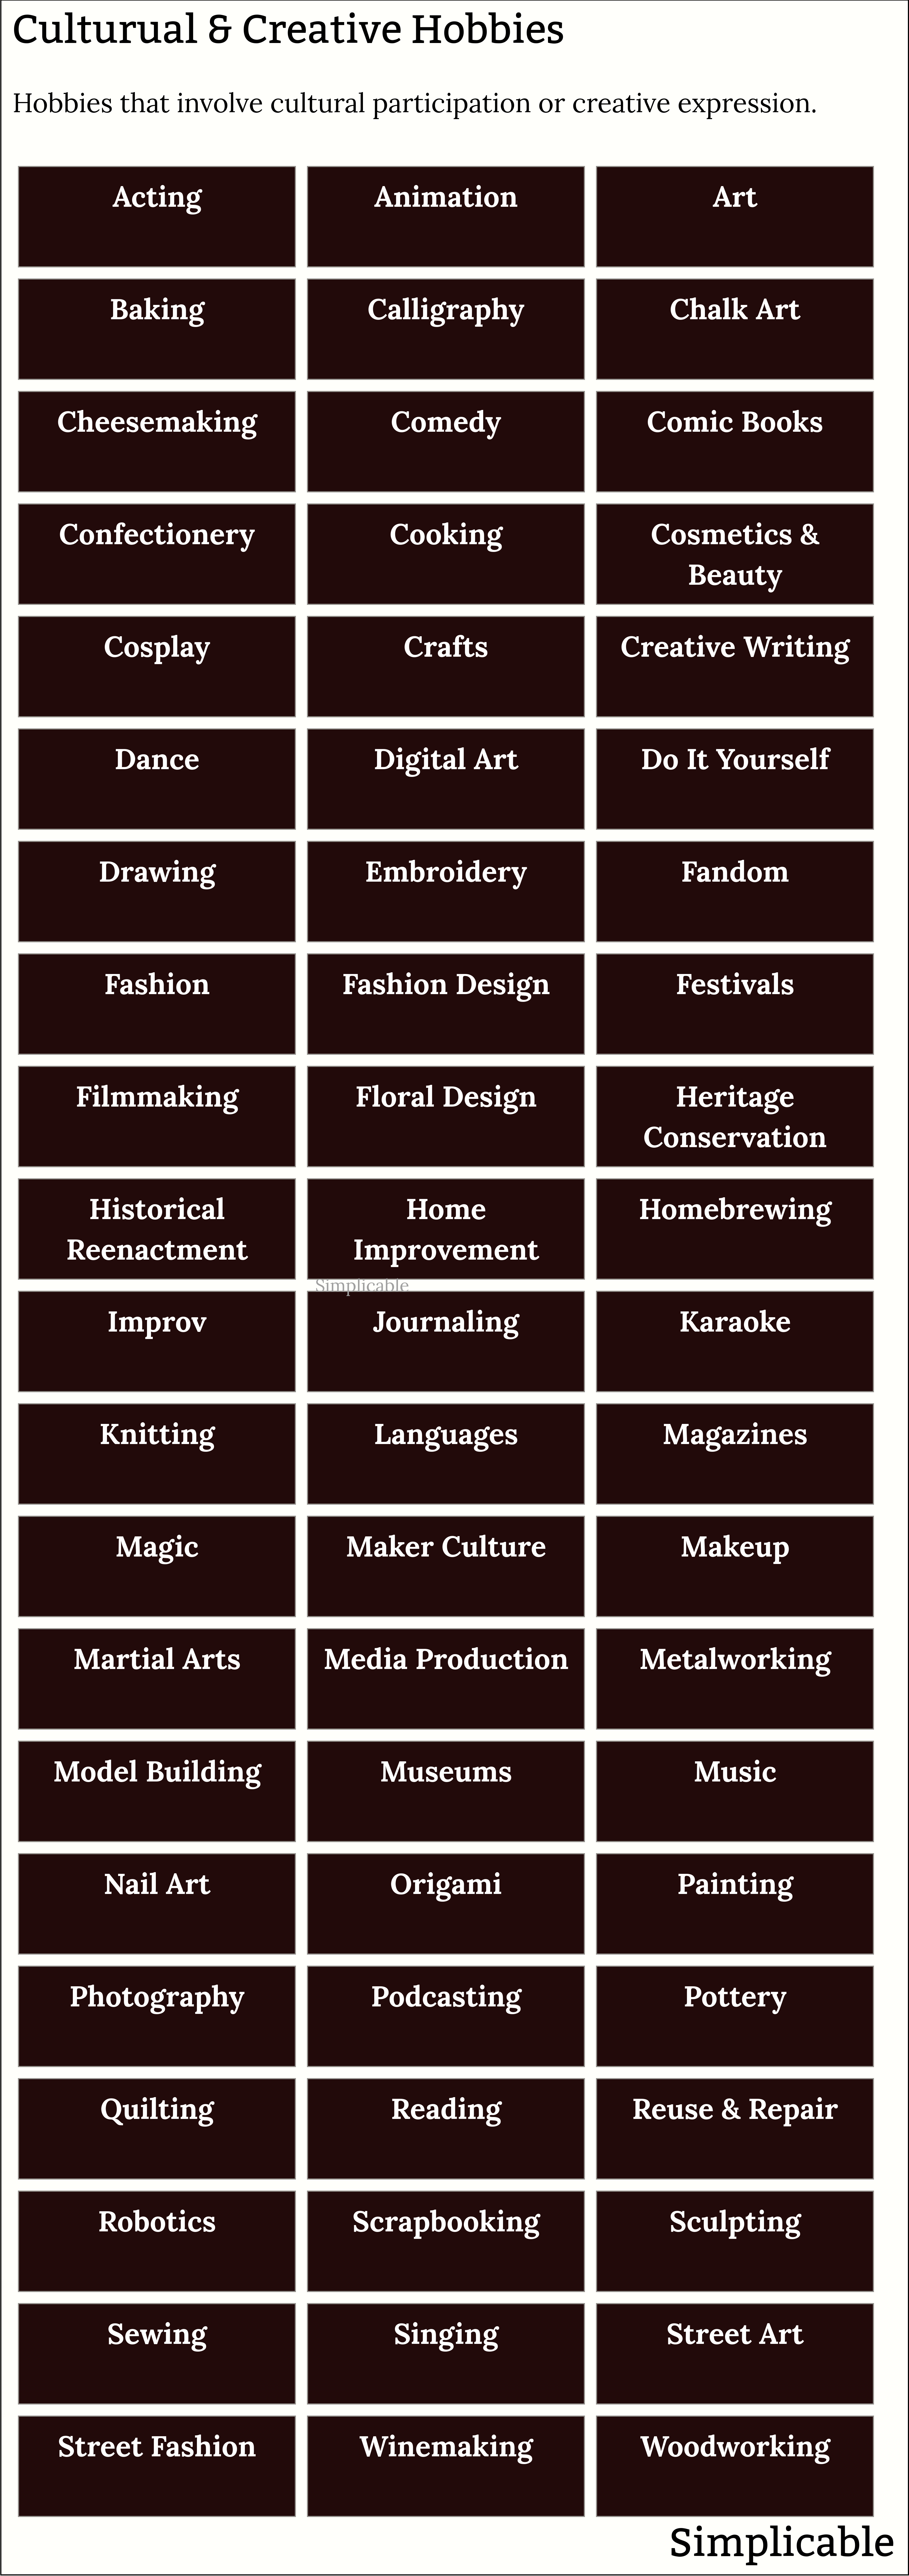 examples of cultural and creative hobbies